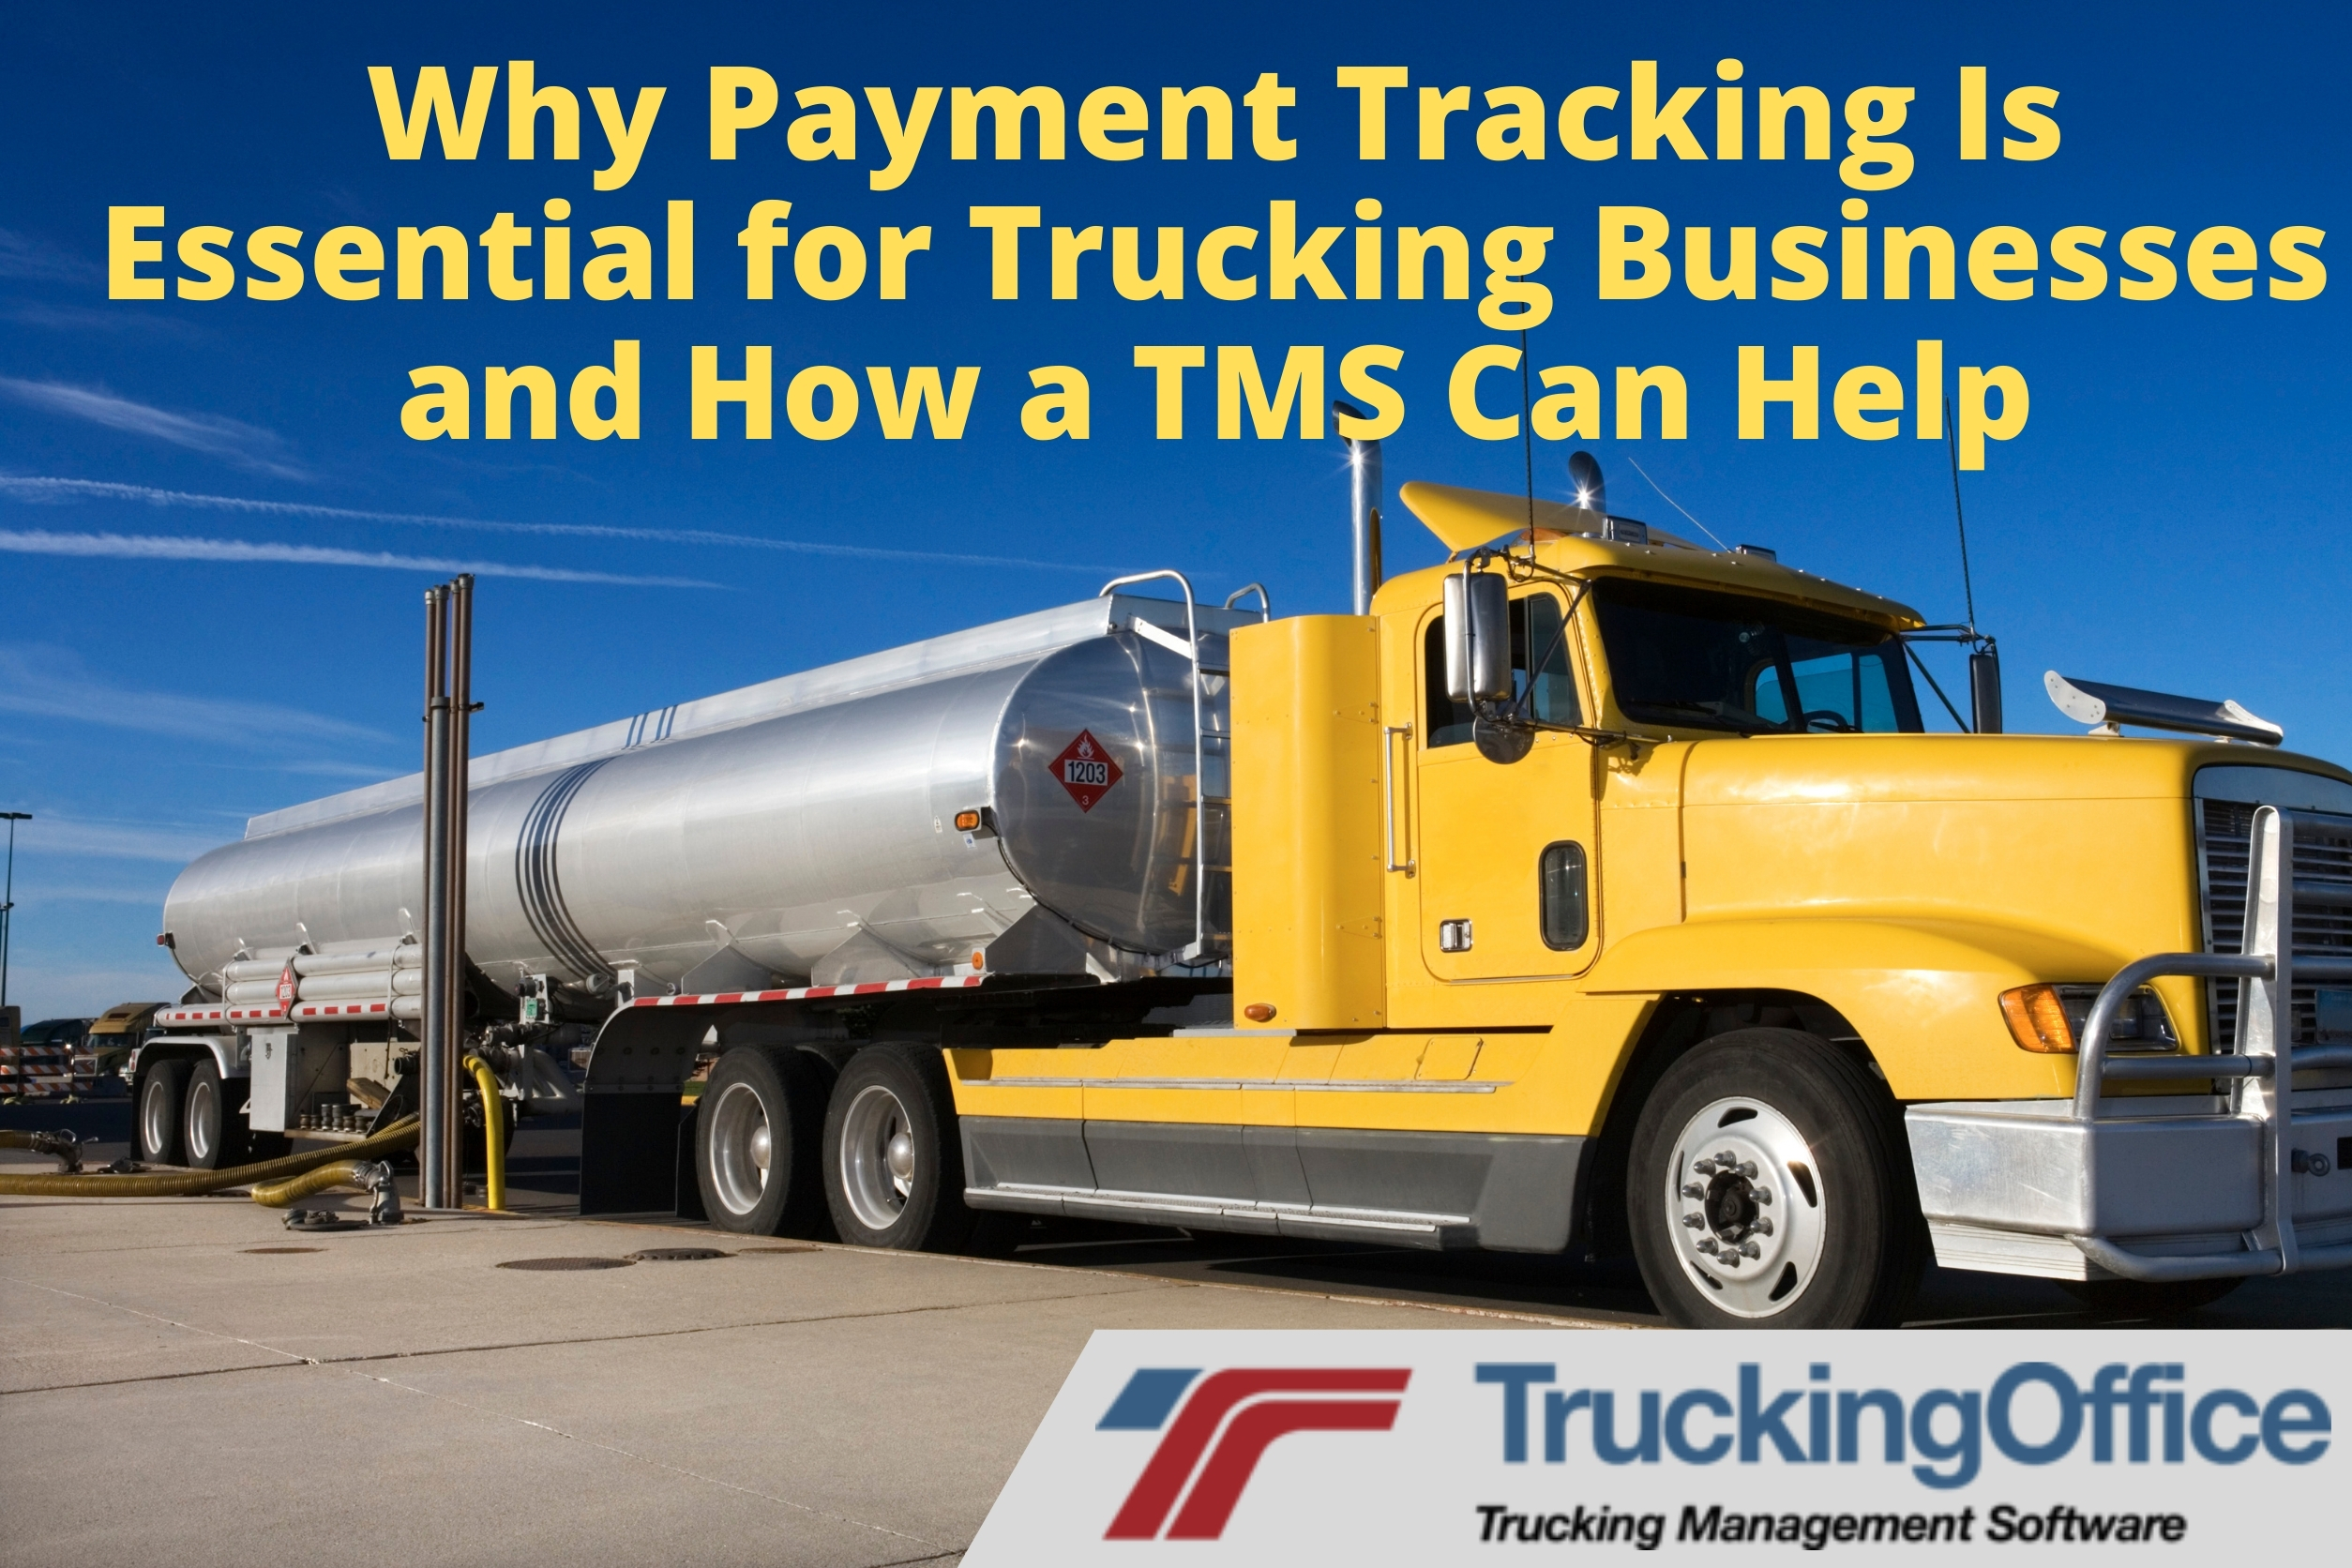 Why Payment Tracking Is Essential for Trucking Businesses and How a TMS Can Help